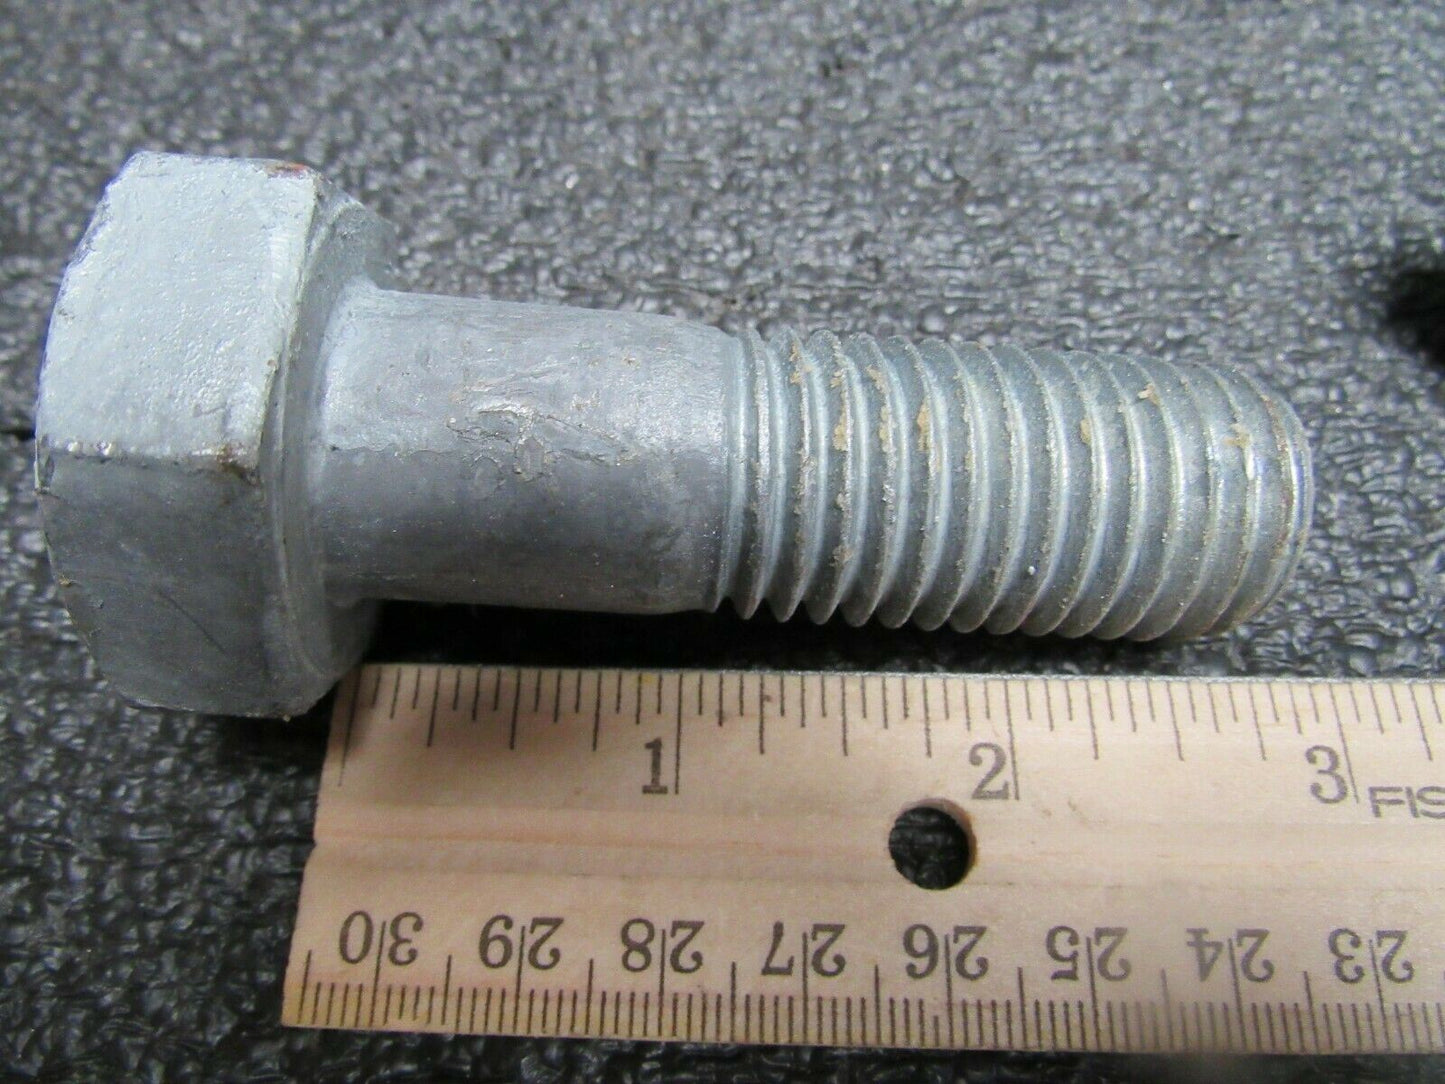 (5) FABORY 7/8"-9 Steel Structural Bolt with Nut, 2-3/4"L, (184307800433-BT08)